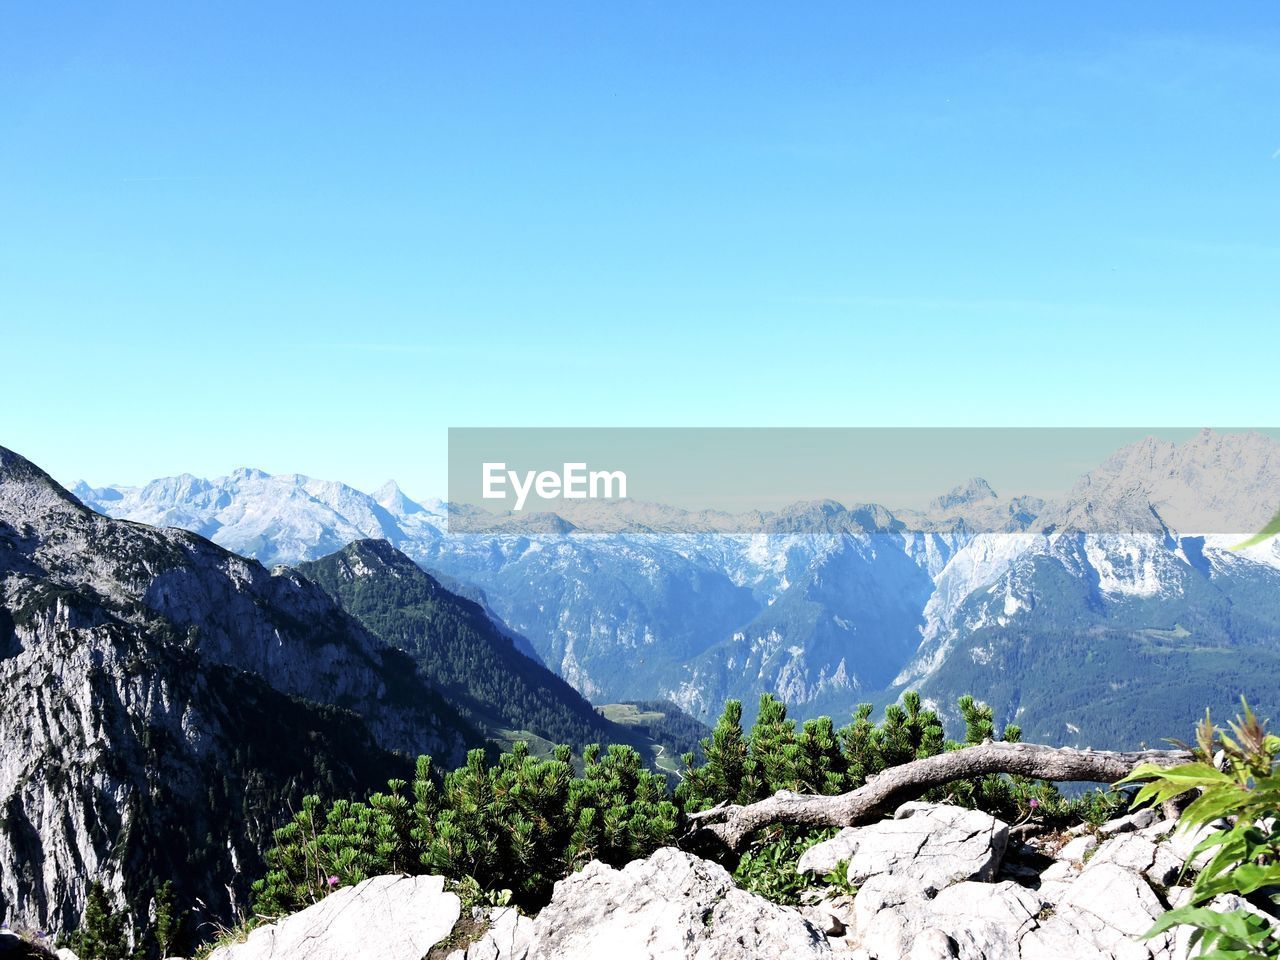 SCENIC VIEW OF MOUNTAINS AGAINST CLEAR BLUE SKY